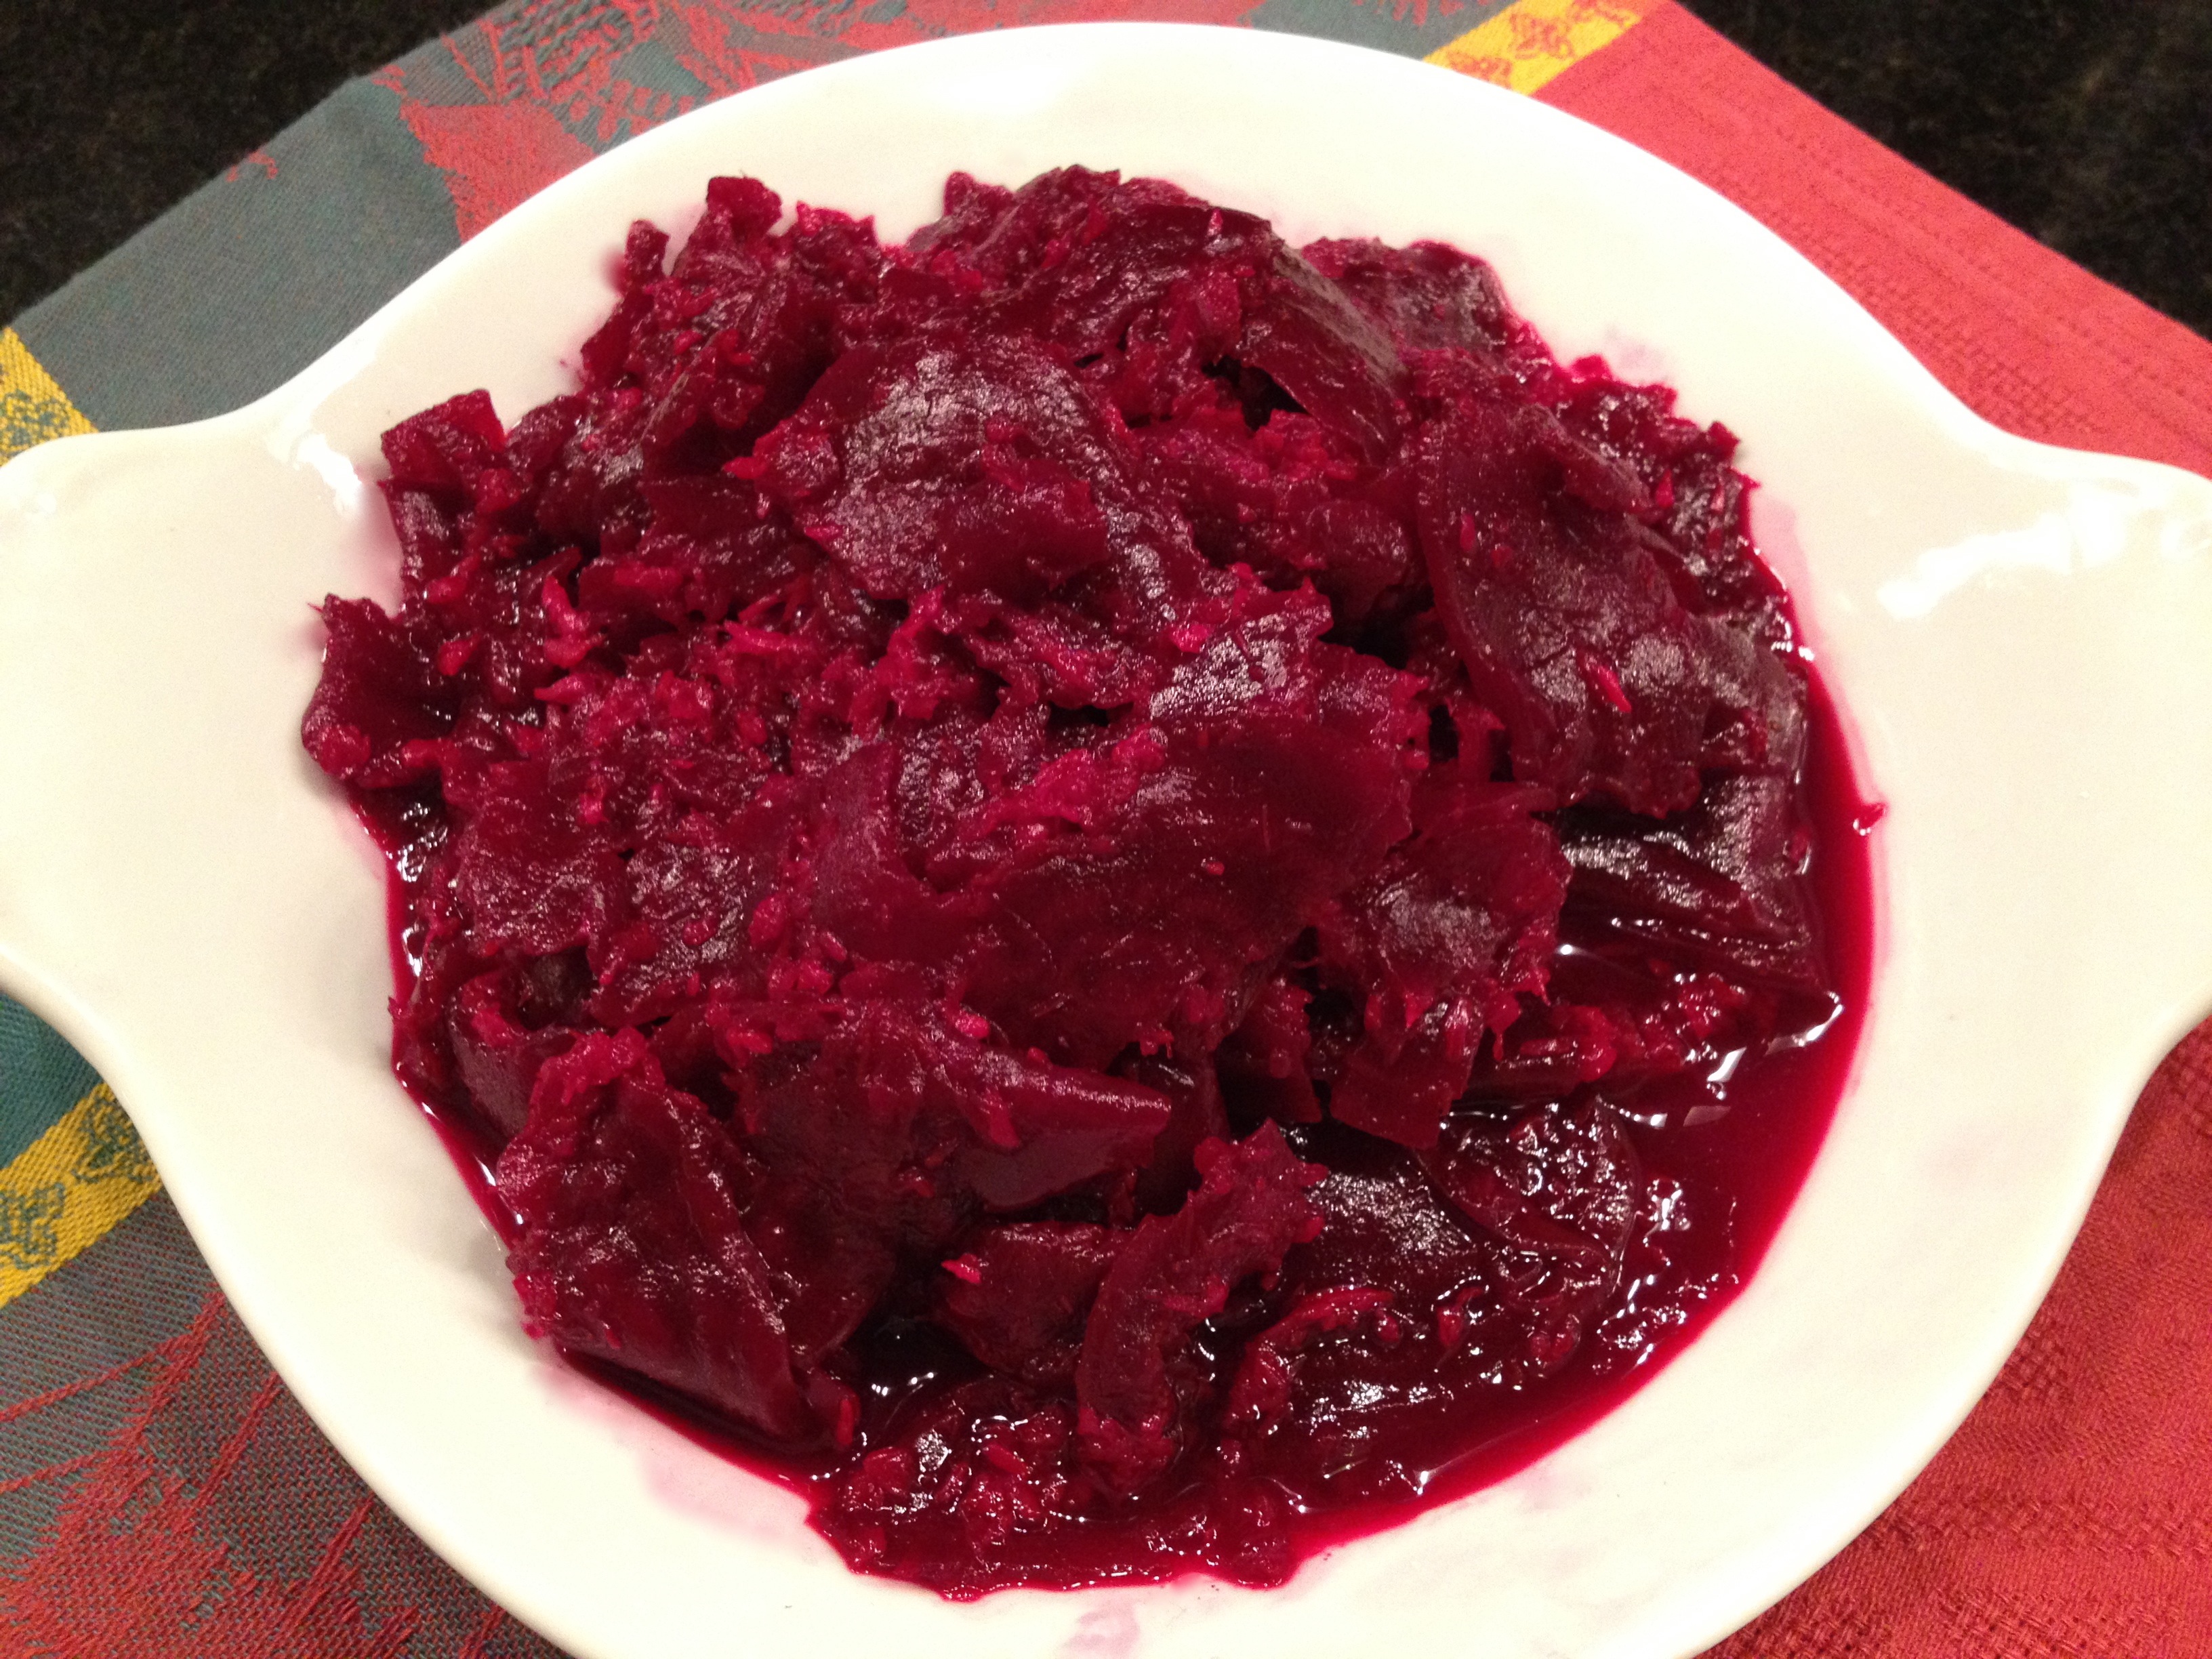 Beets and horseradish on a white plate. Chrzan on a white plate.